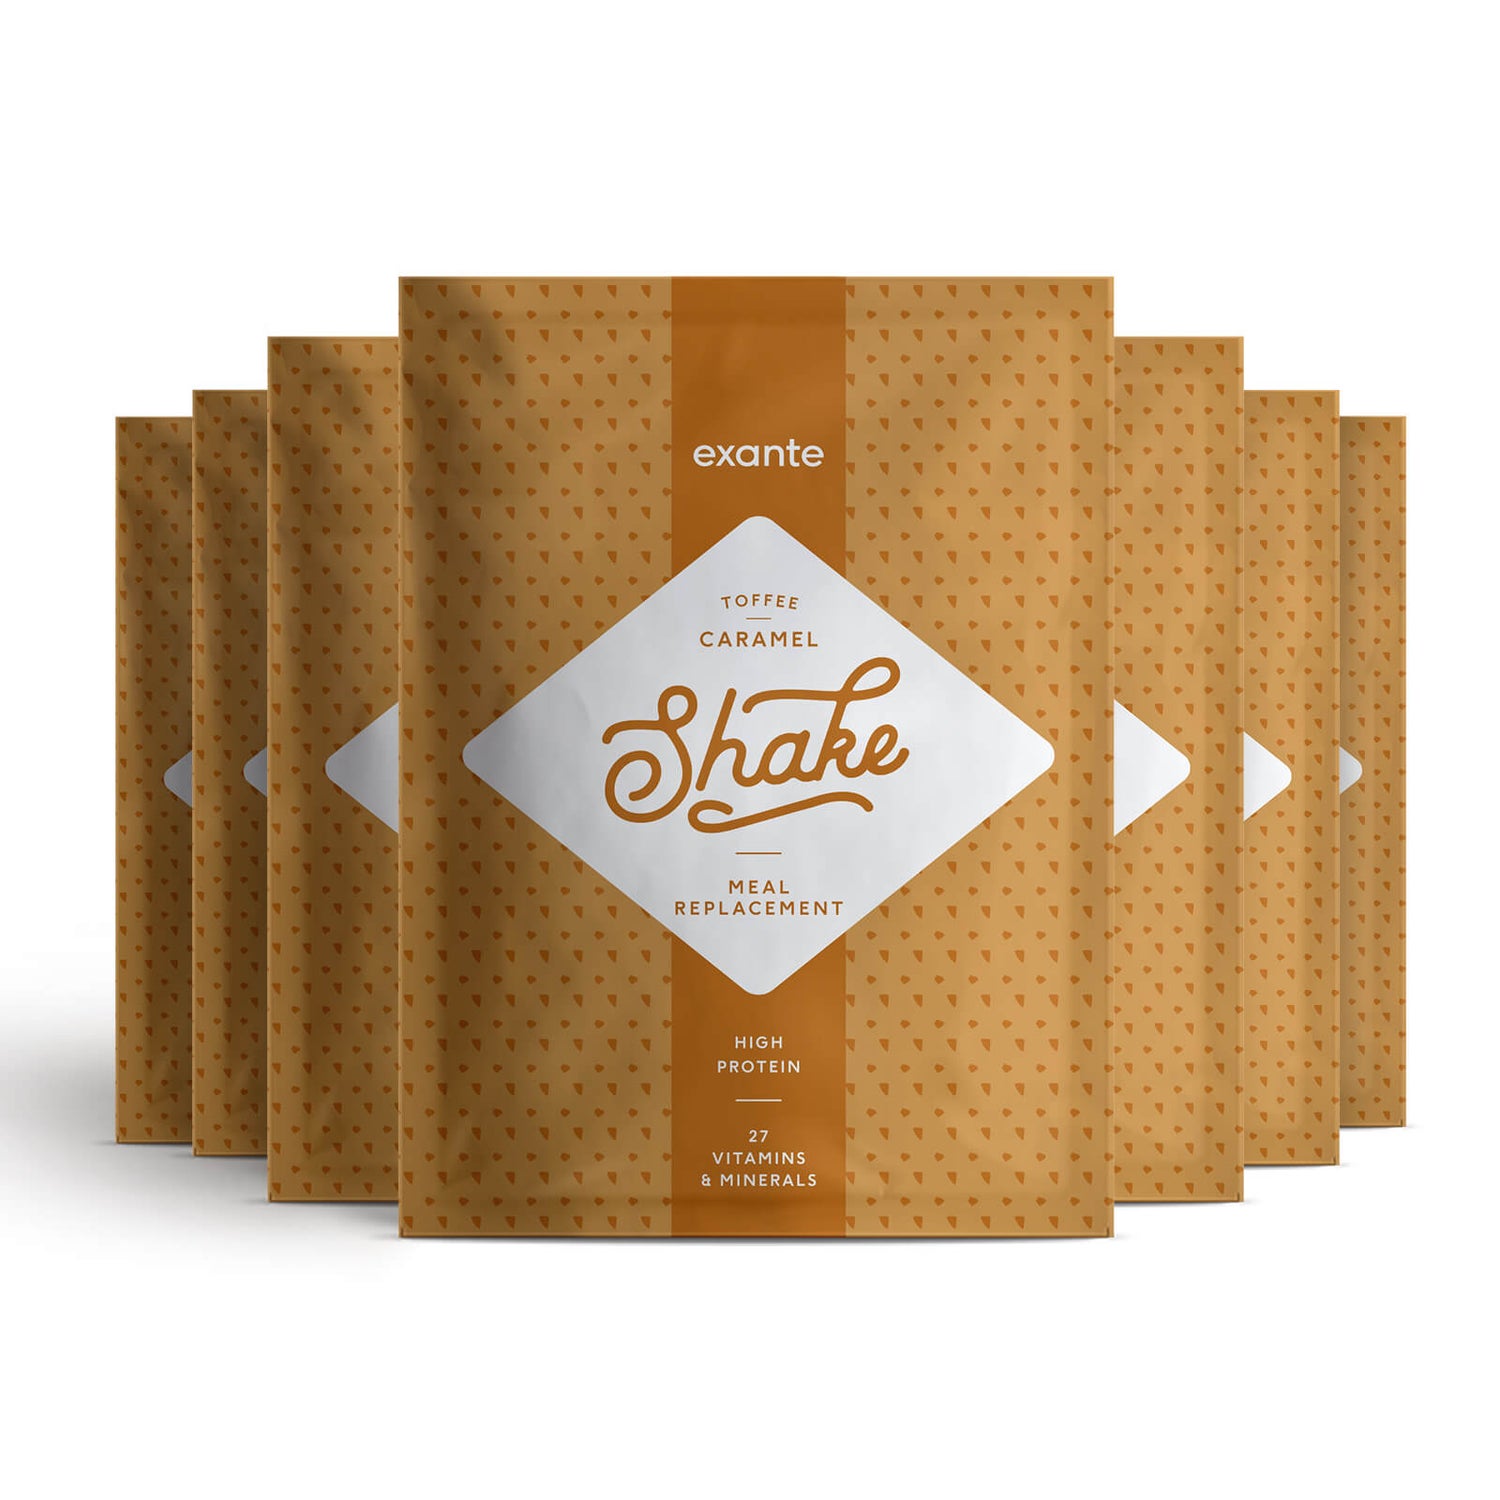 Meal Replacement Box of 7 Toffee Caramel Shakes